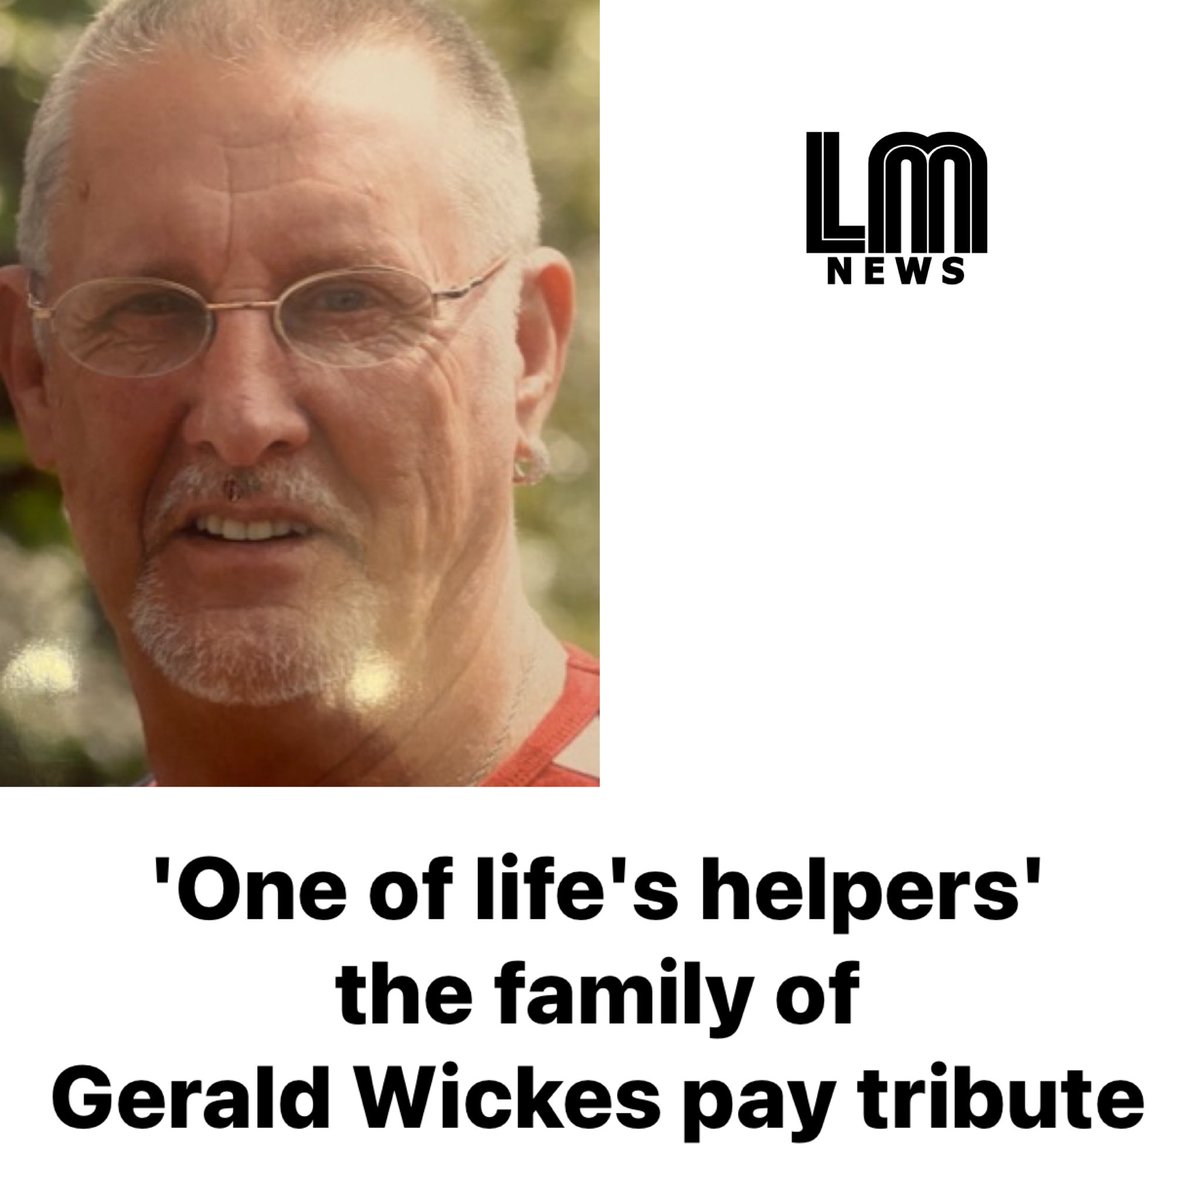 Following today’s sentence, the family of Gerald Wickes have paid tribute to him describing him as a “doting” dad, grandad and great-grandad who was “one of life’s helpers”. Garry Wickes, the son of Gerald Wickes, said: “I am so very proud to say that Ged Wickes was my dad.